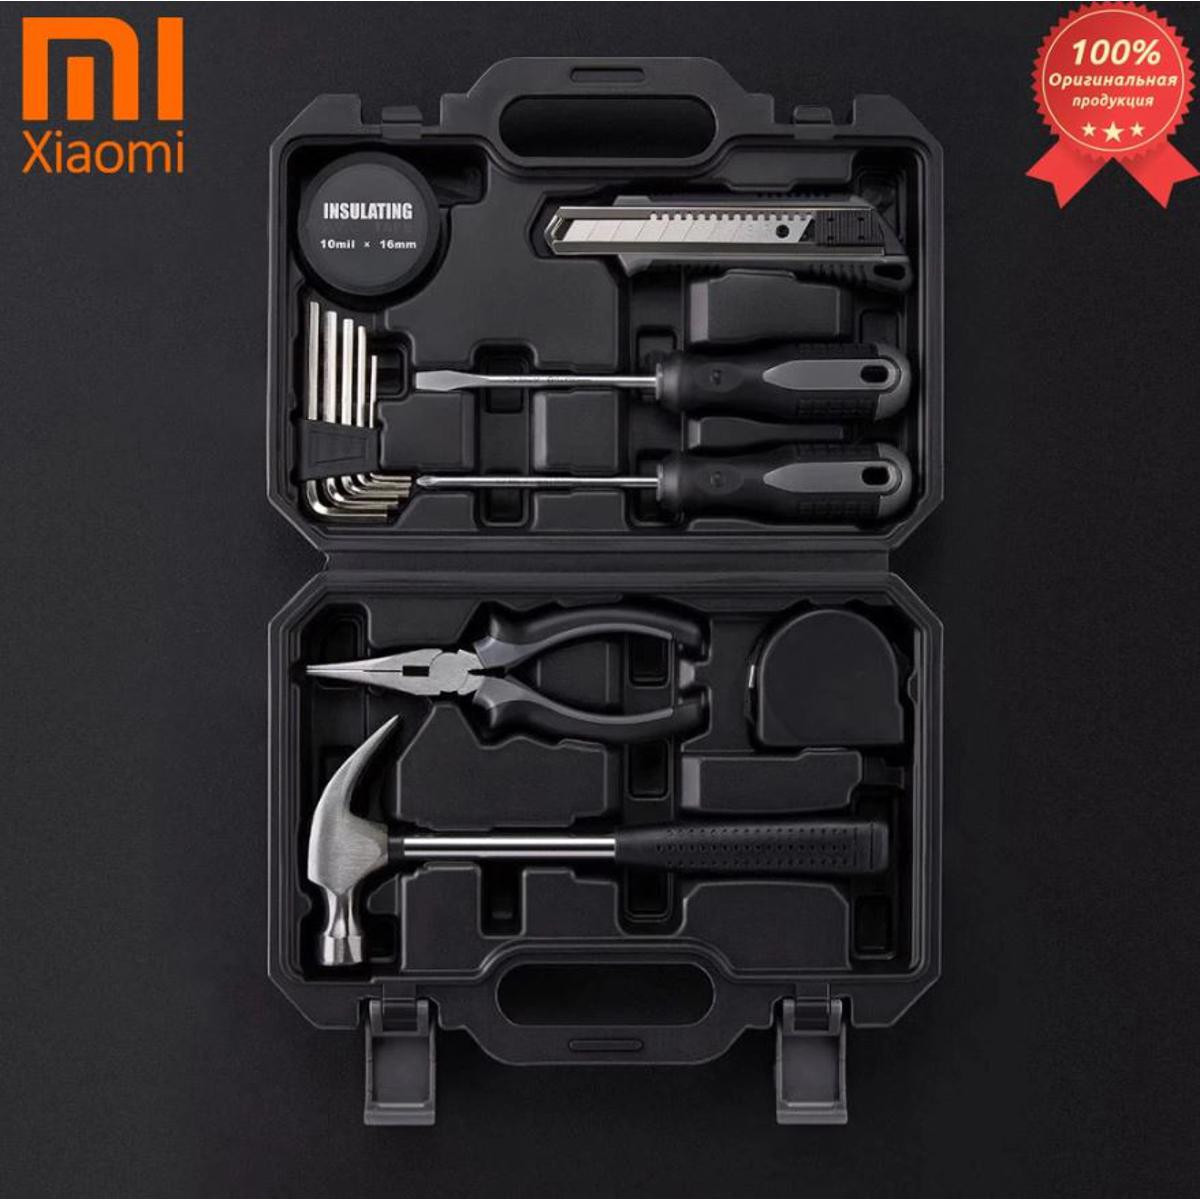 XIAOMI JIUXUN Hand Tool Set General Household Repair Hand Tool Kit With Toolbox Storage Case Wrench Hammer Tape Plier - Black